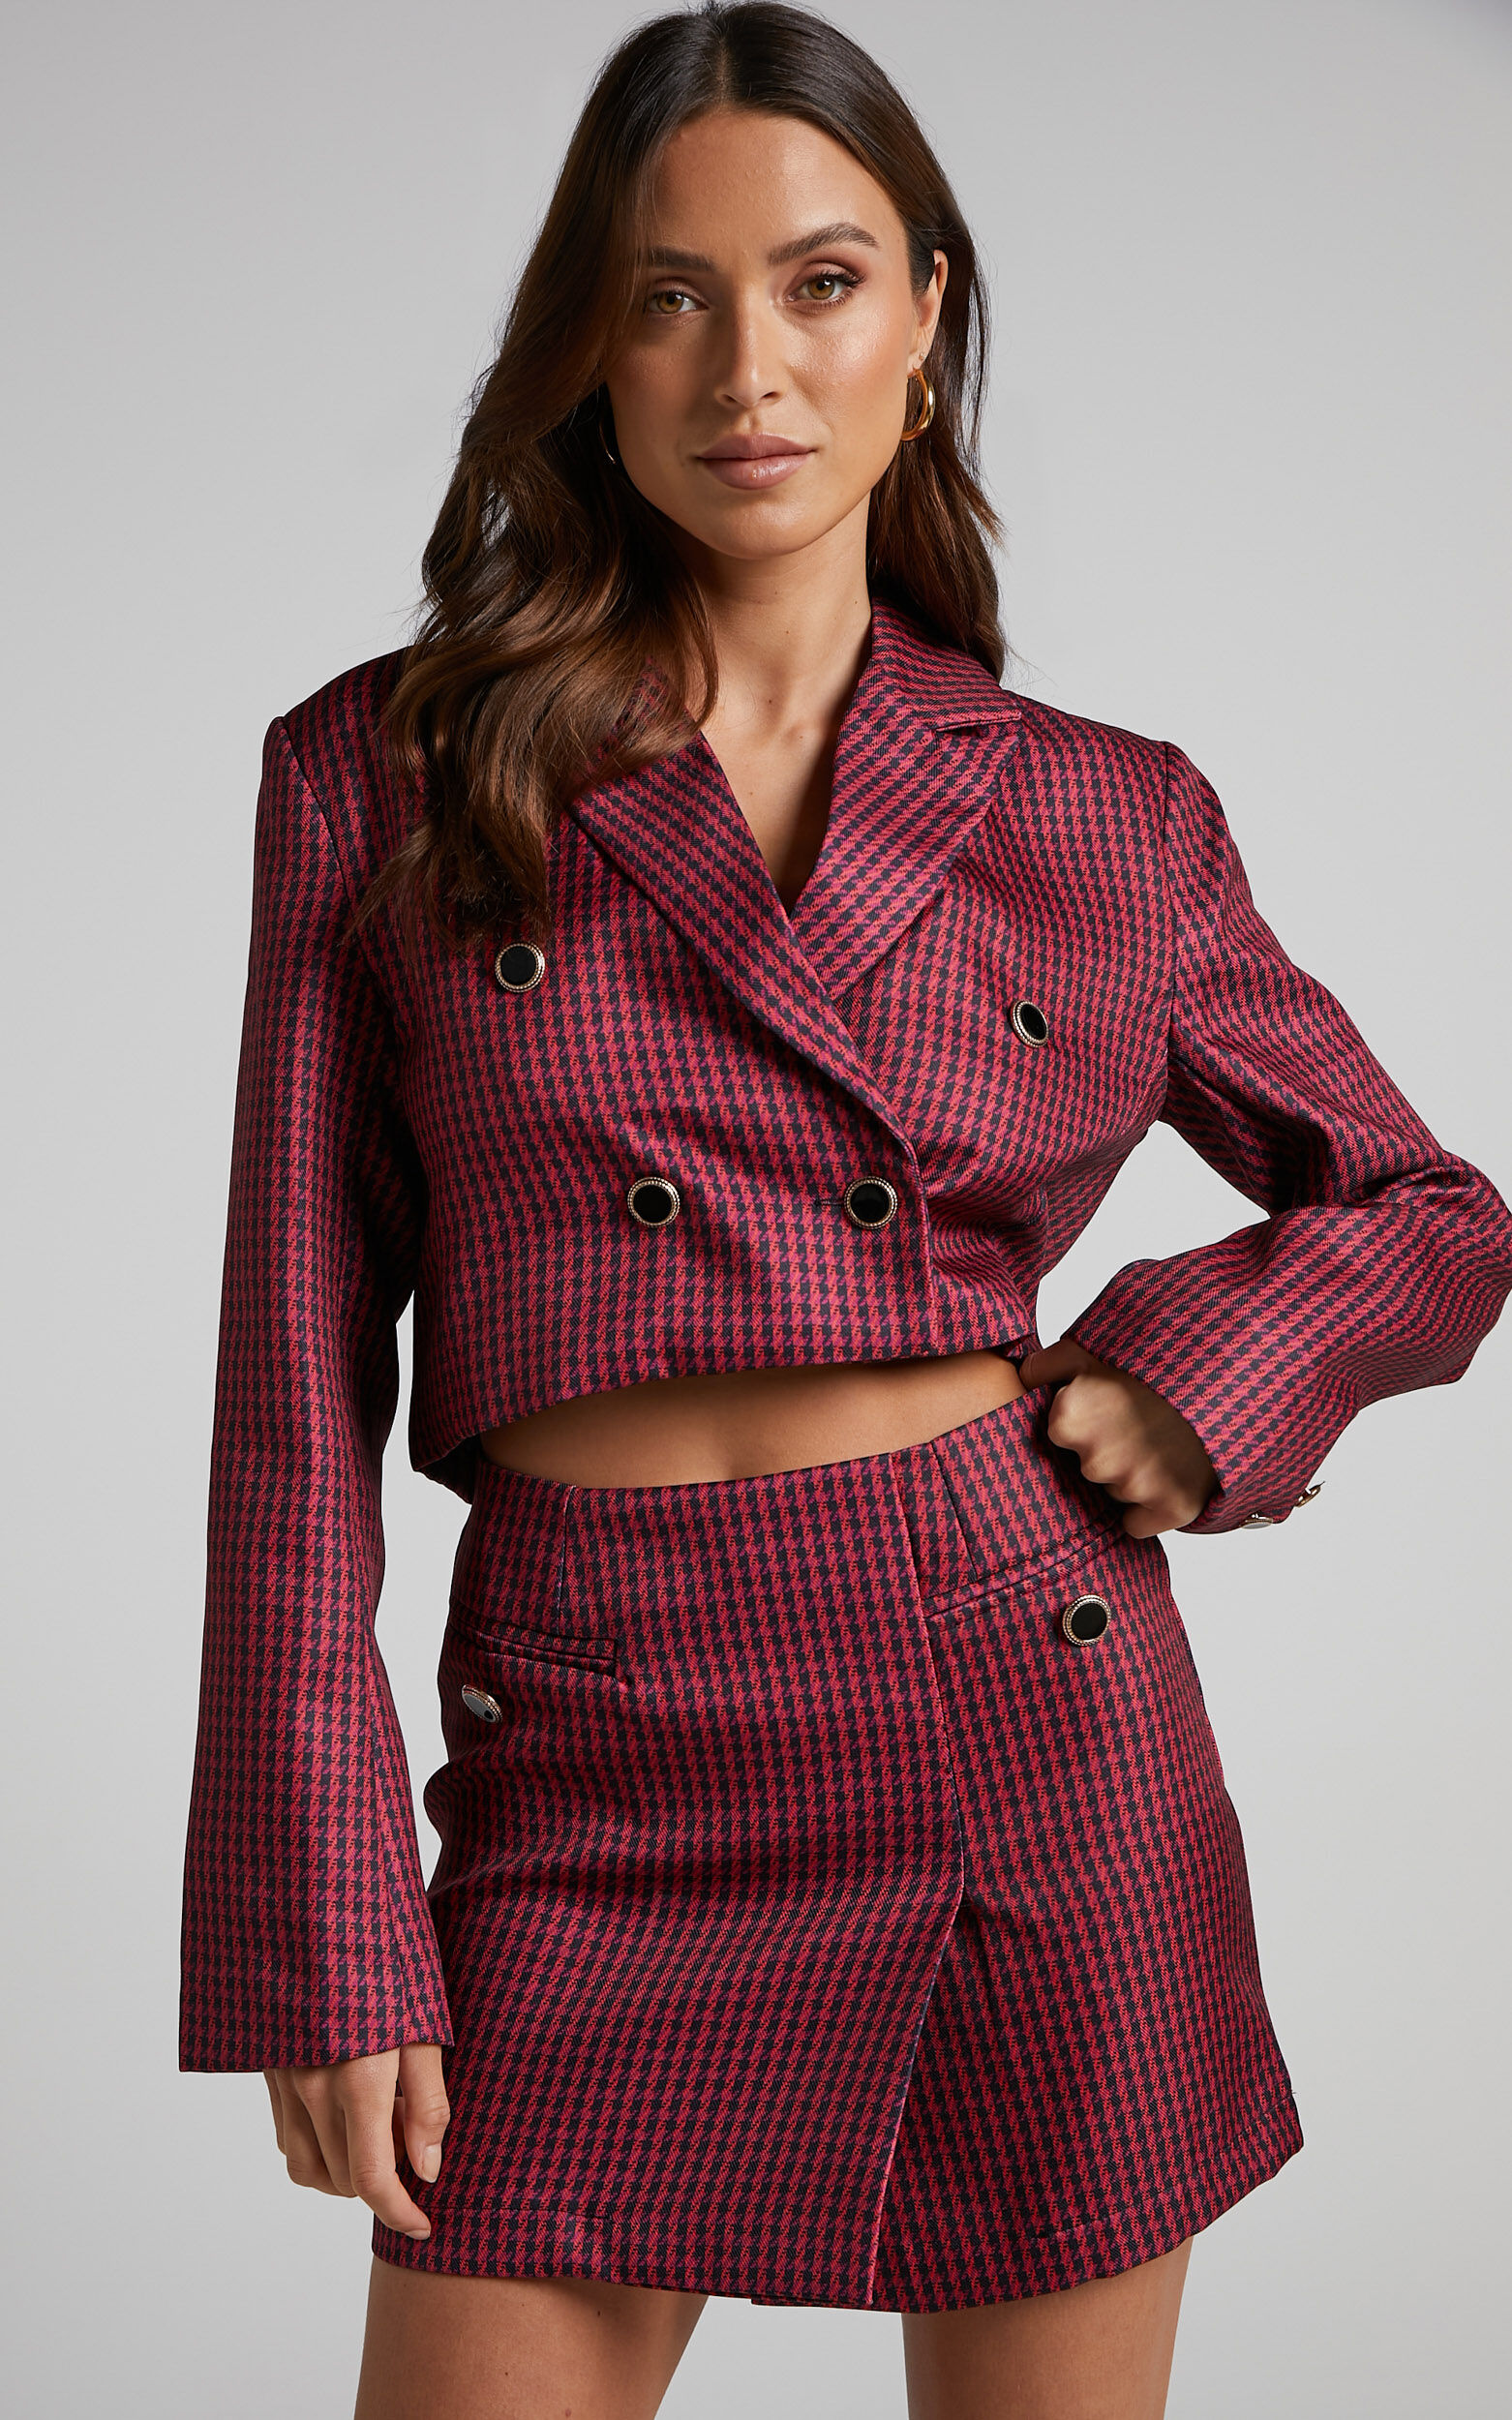 Merie Blazer - Cropped Double Breasted Houndstooth Blazer in Burgundy - L, RED1, super-hi-res image number null